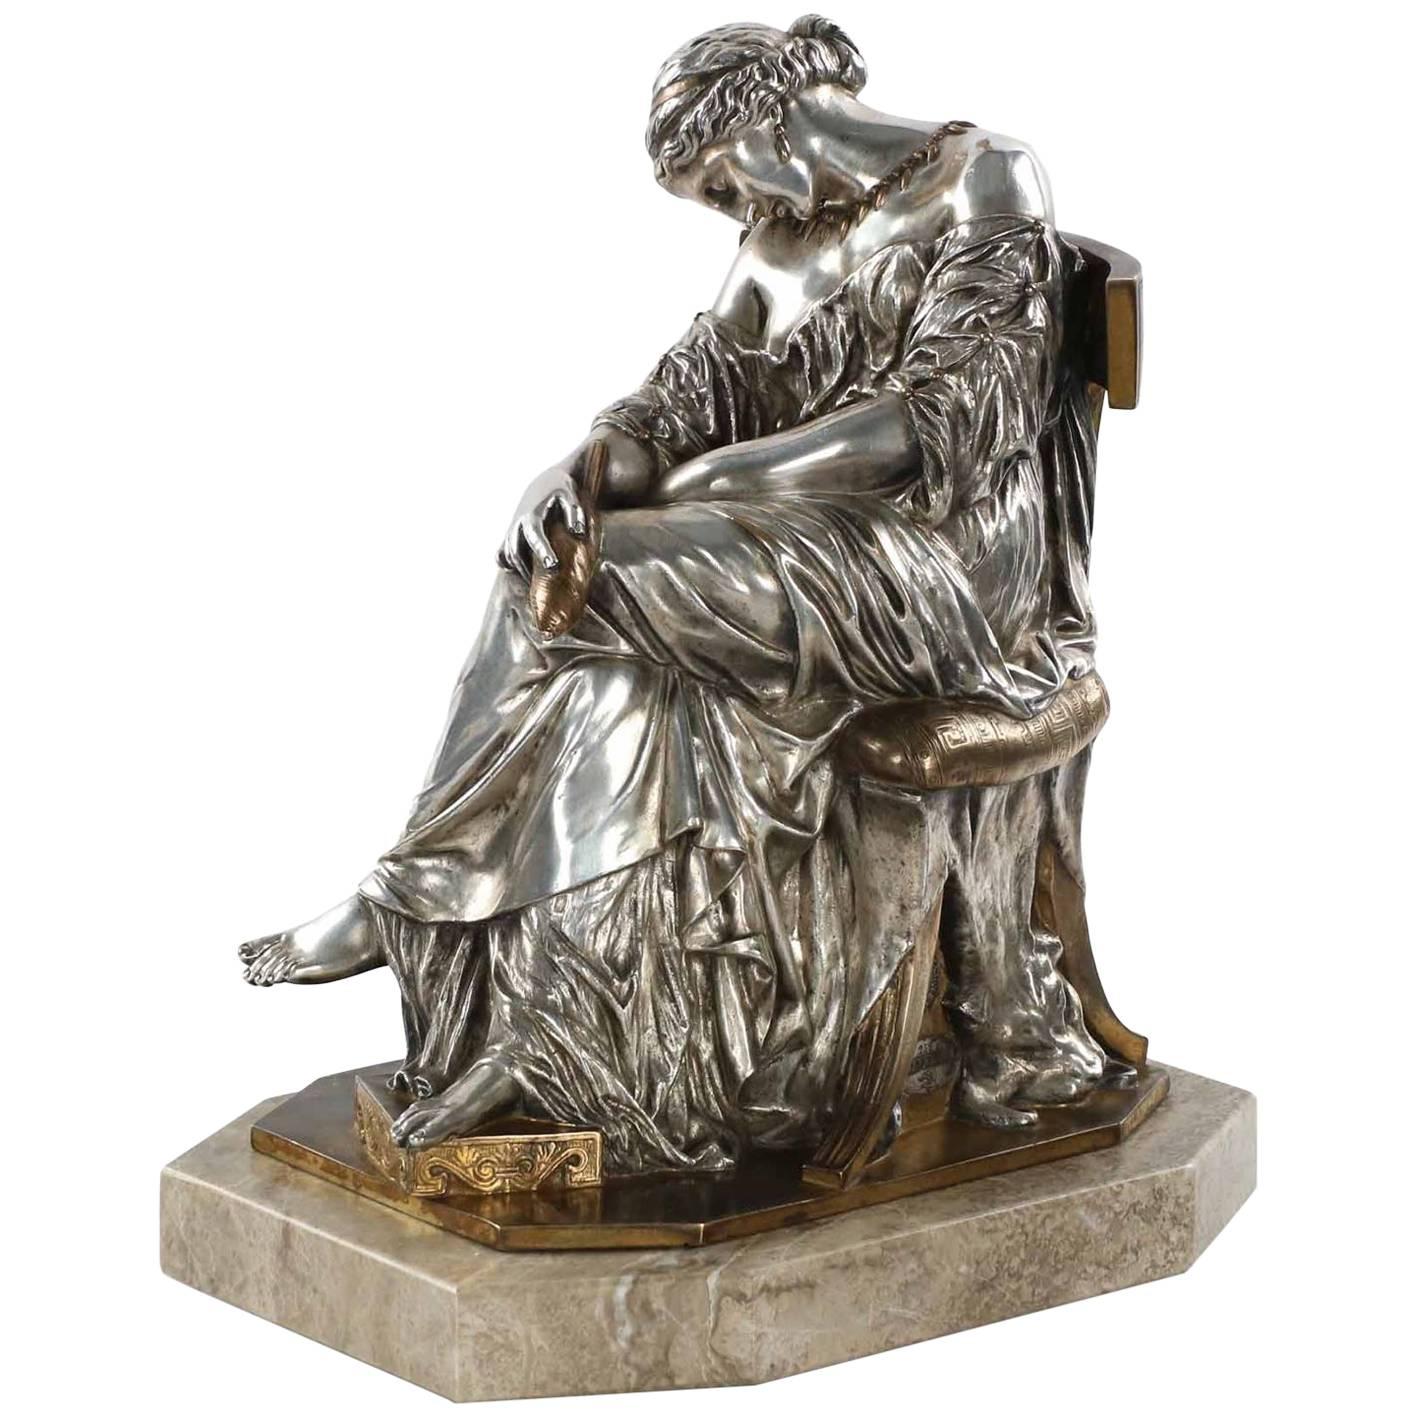 19th Century Silvered French Bronze Sculpture "Penelope" by Pierre Cavelier